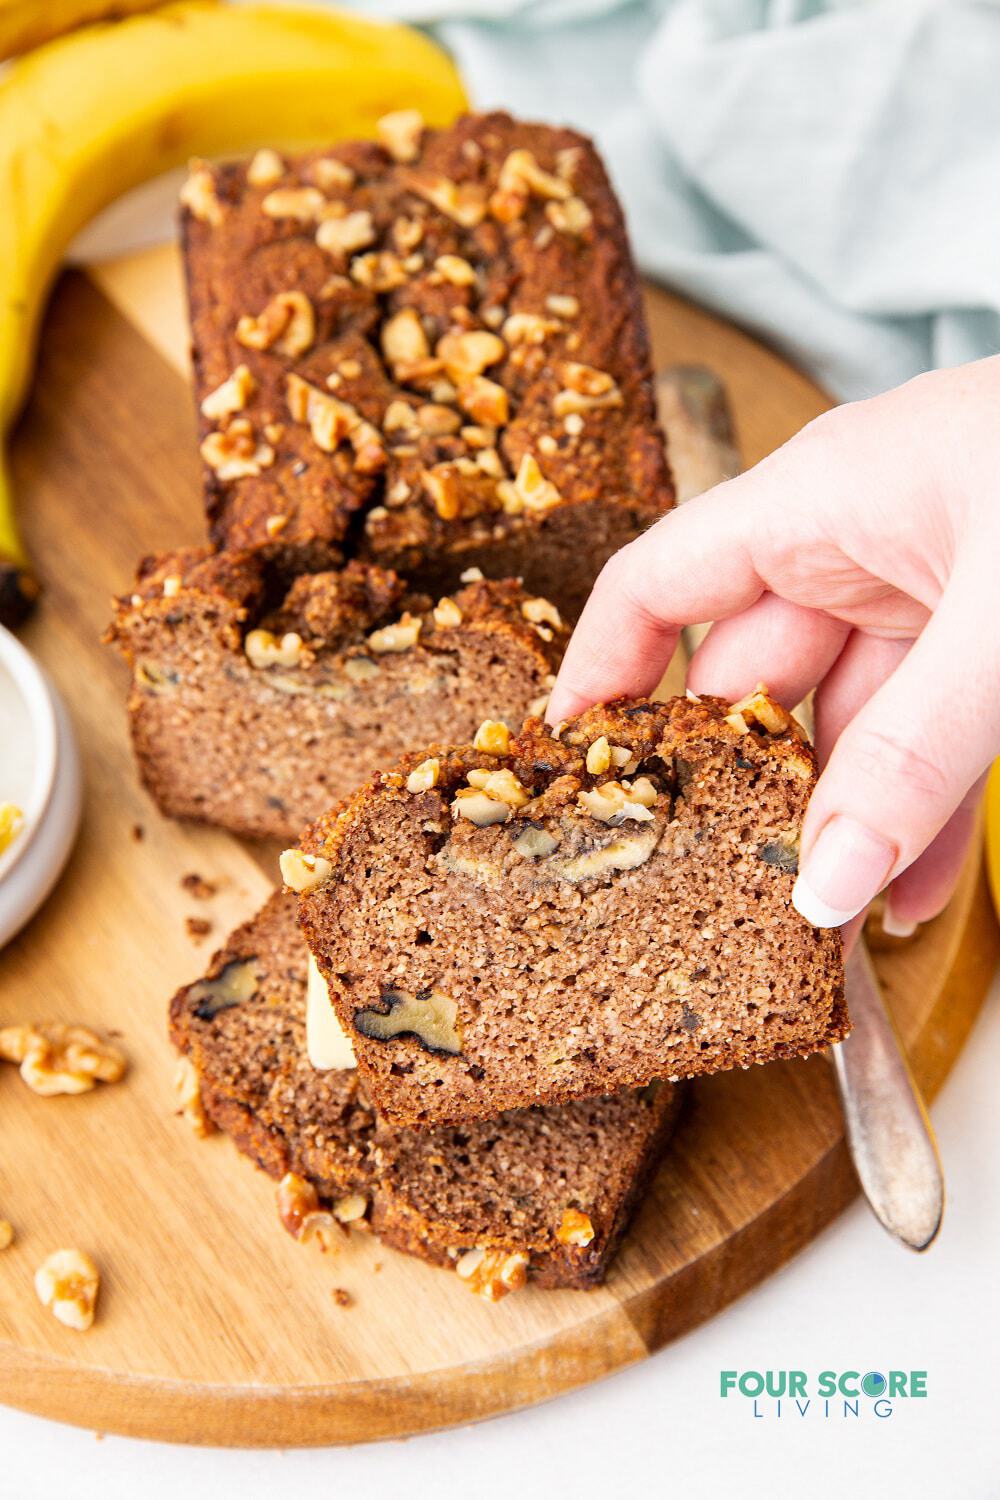 a hand holding a slice of banana bread to show the nuts and texture inside.